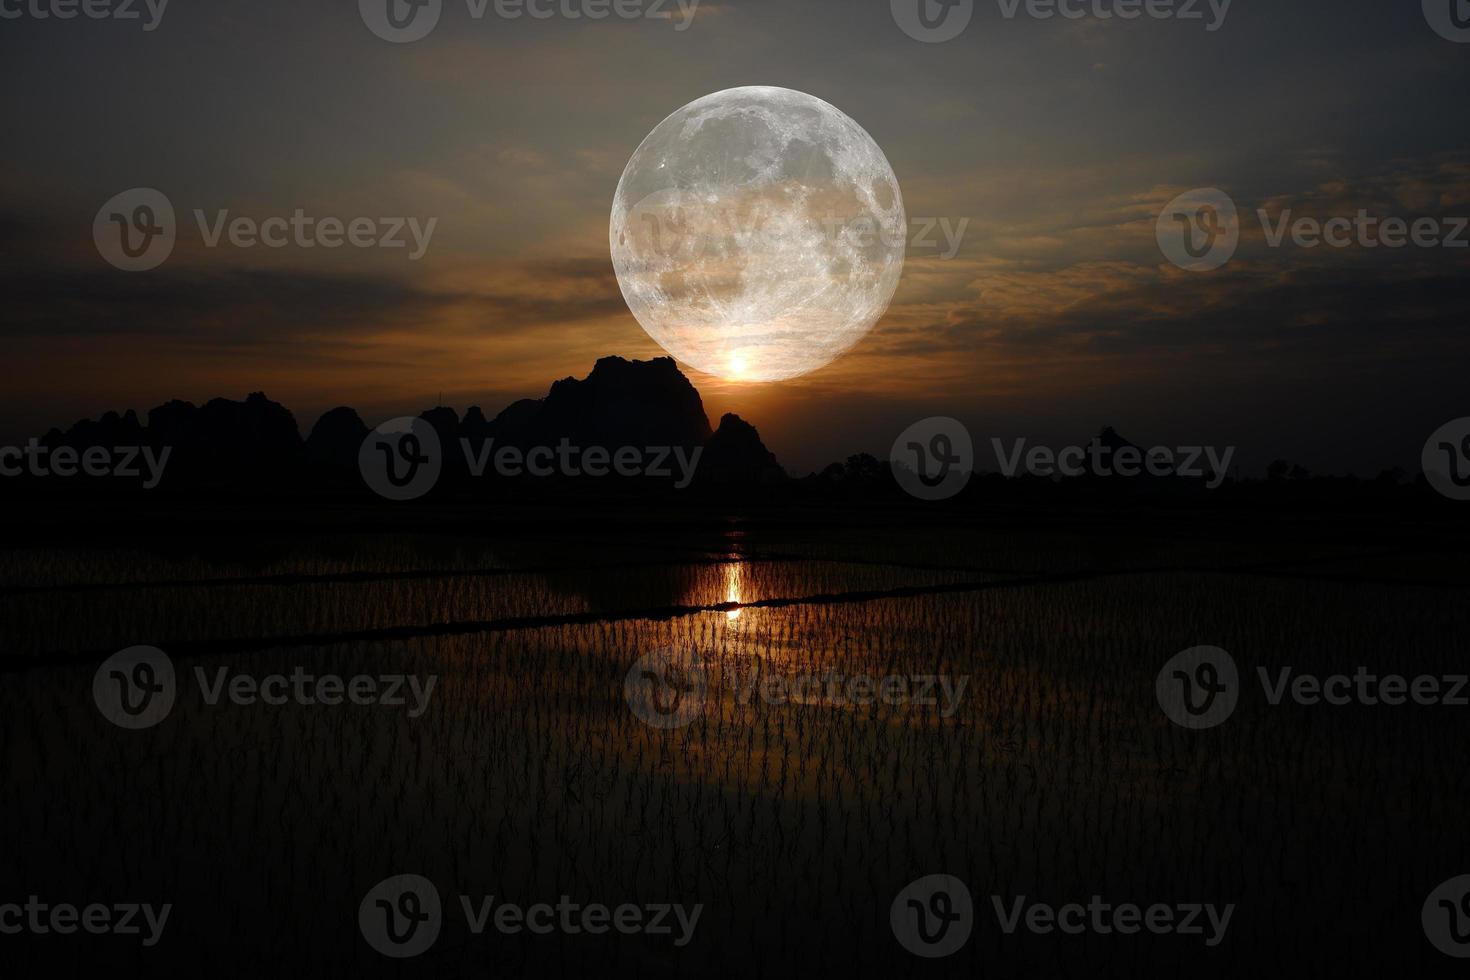 The full moon through the rice field. The full moon is the lunar phase when the Moon appears fully illuminated from Earth's perspective. This occurs when Earth is located between the Sun and the Moon. photo